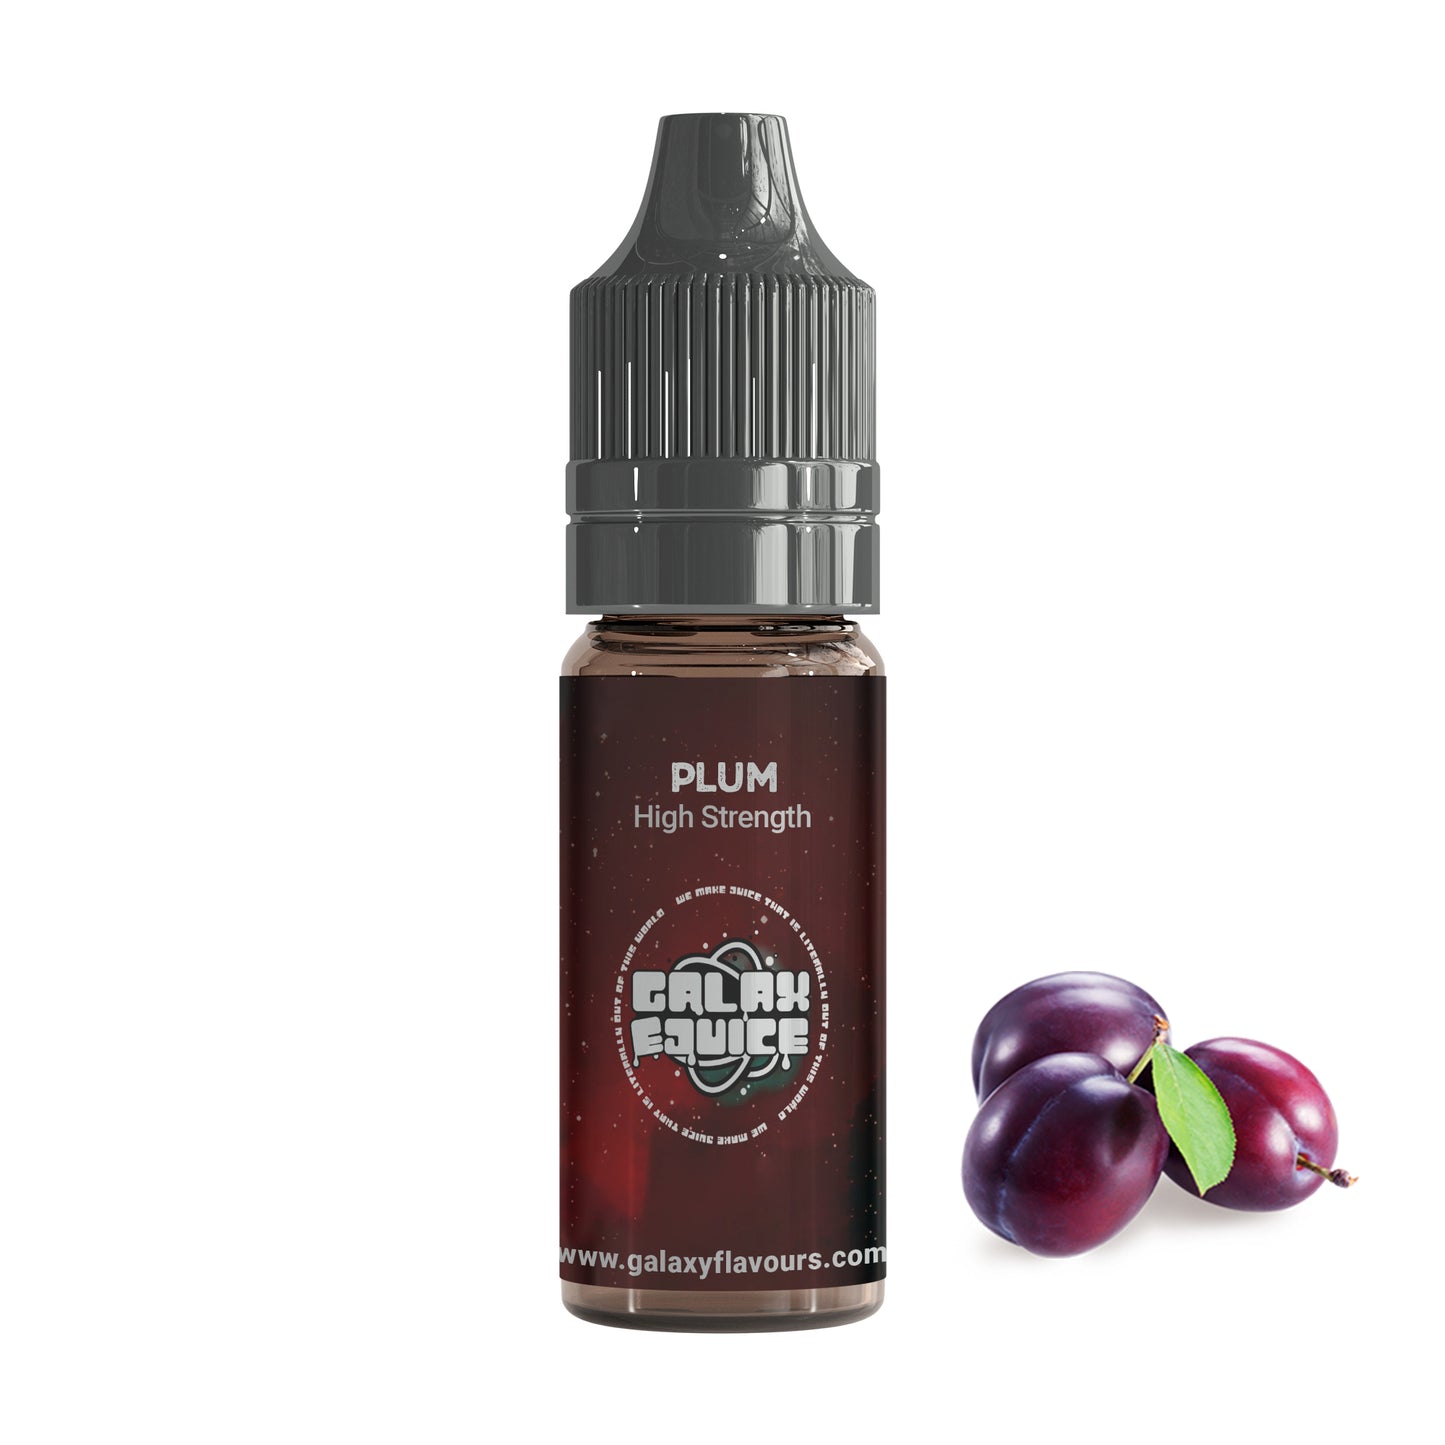 Plum High Strength Professional Flavouring.